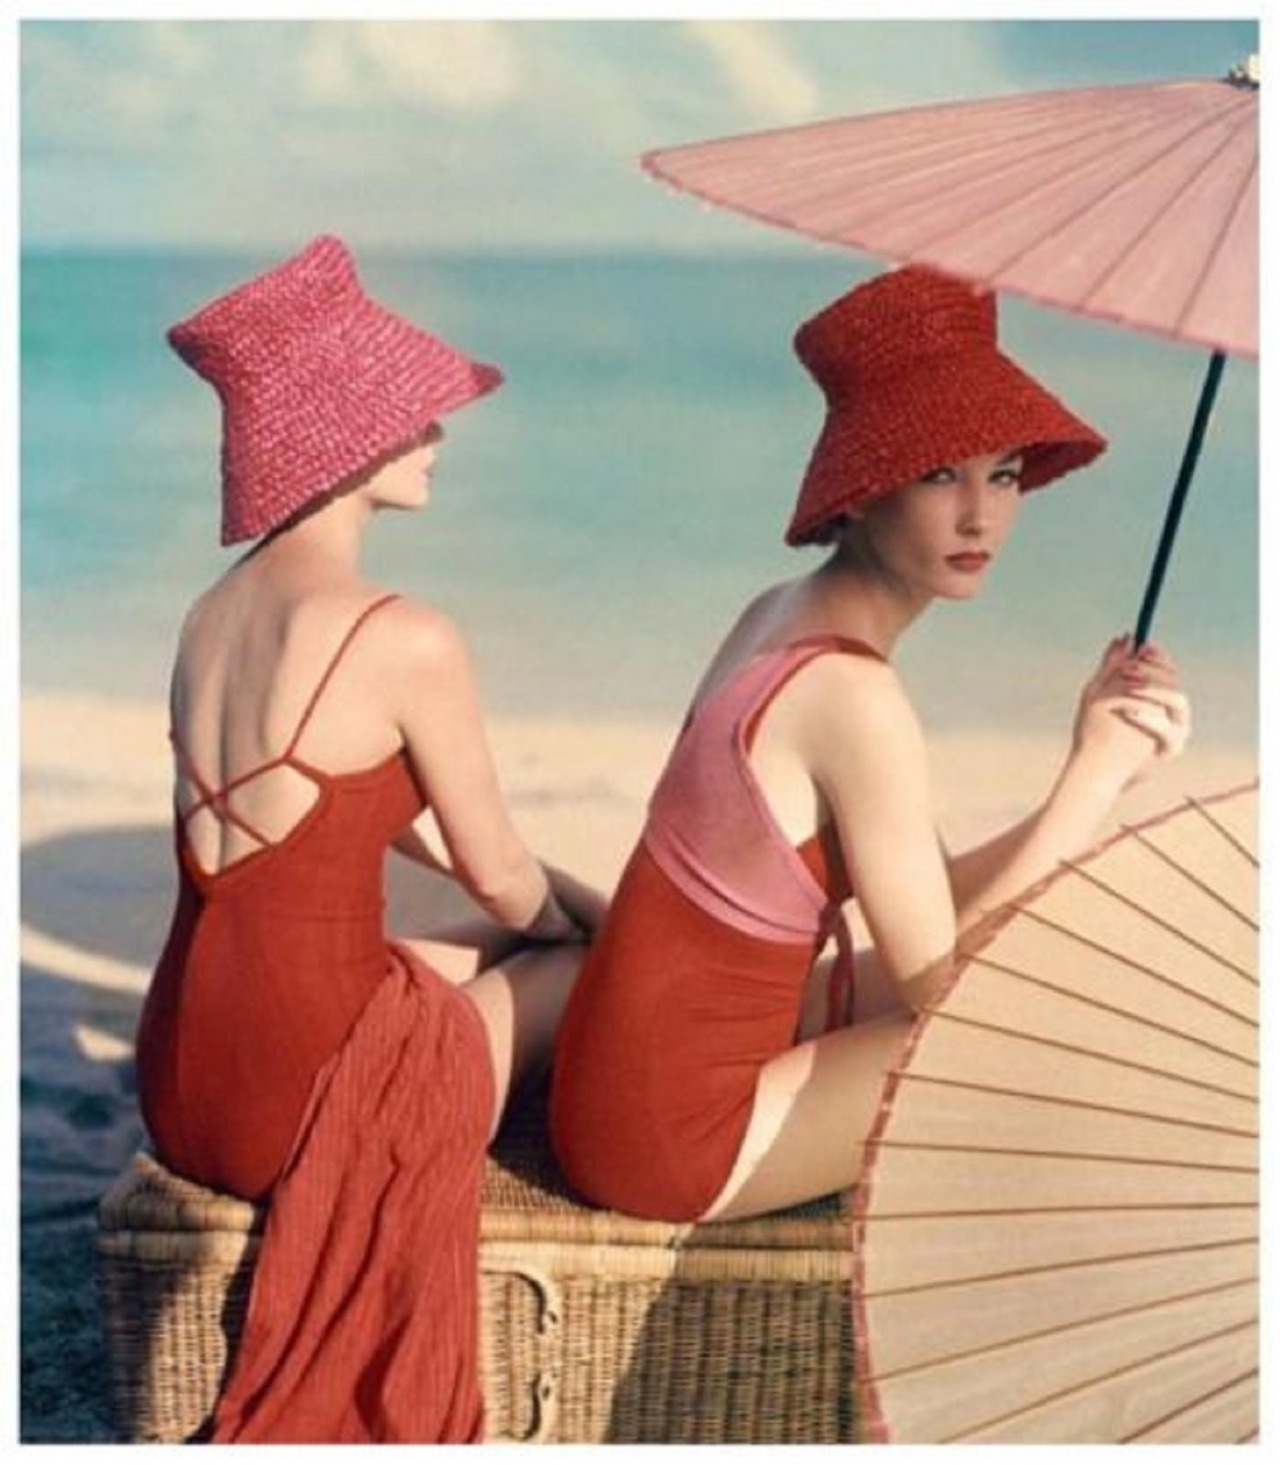 Clifford Coffin for Vogue, 1949